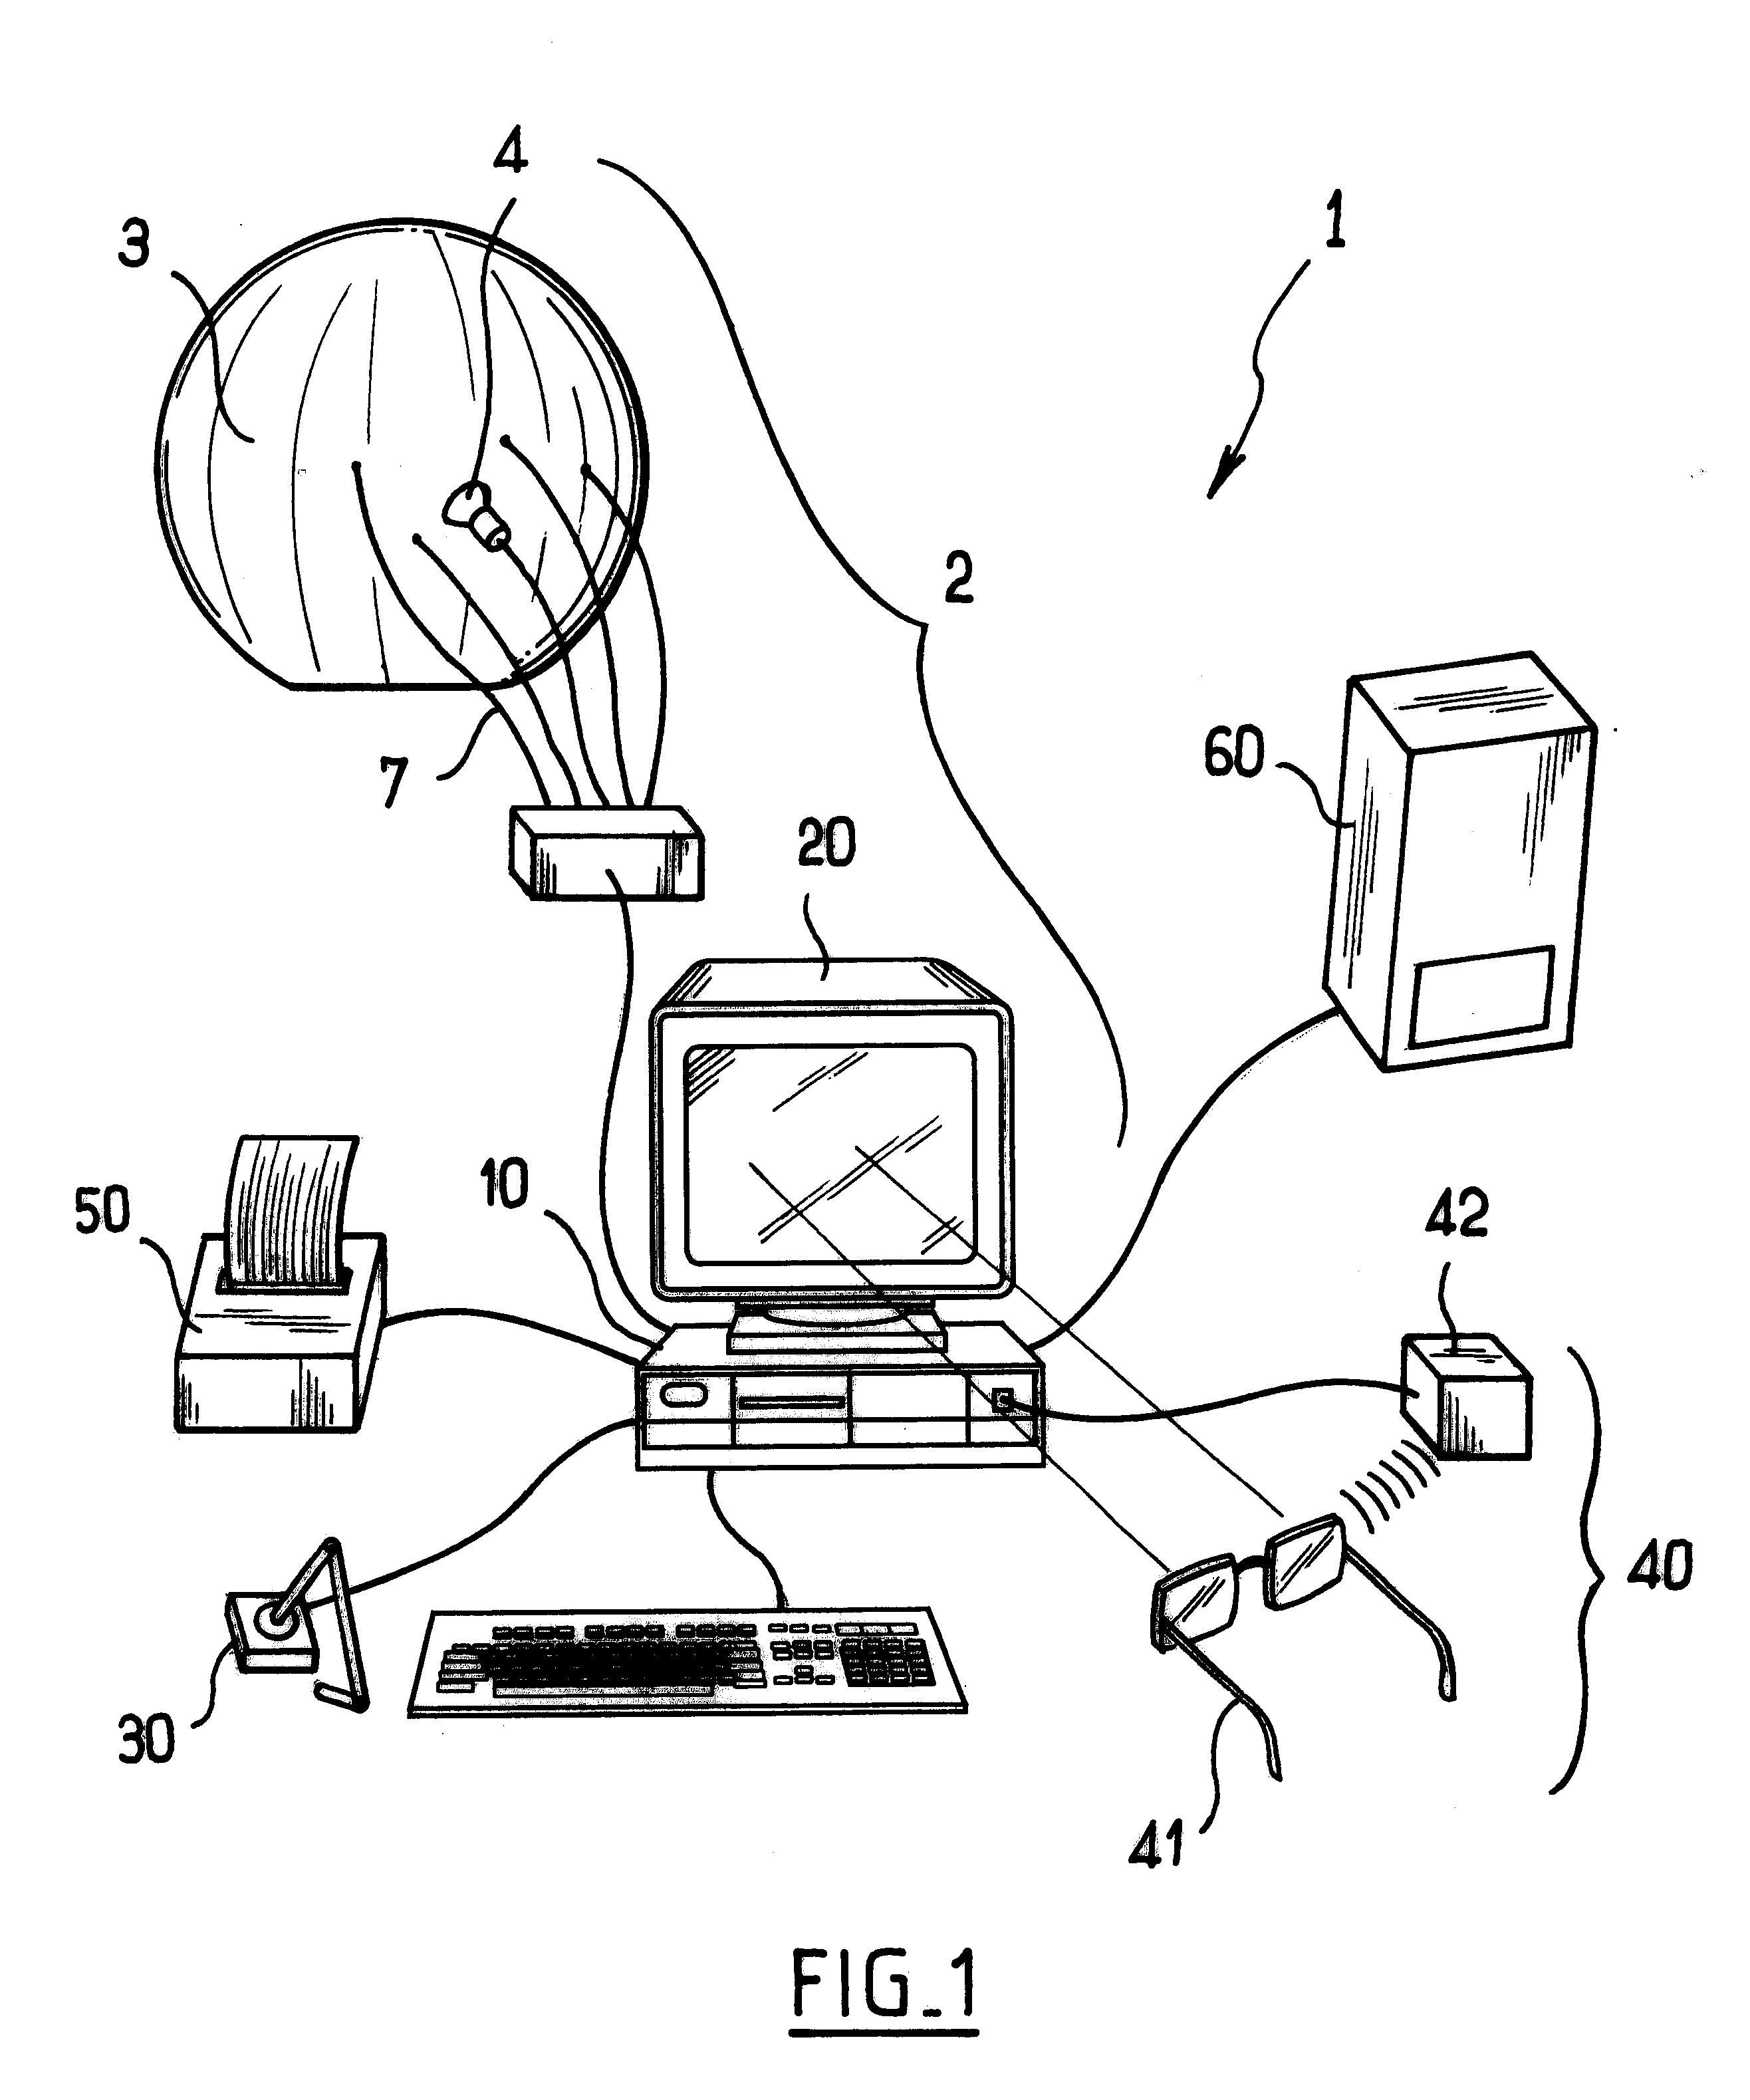 Apparatus for assisting makeup and an assembly constituted by such apparatus and apparatus for delivering makeup having a predetermined BRDF as selected by the apparatus for assisting makeup